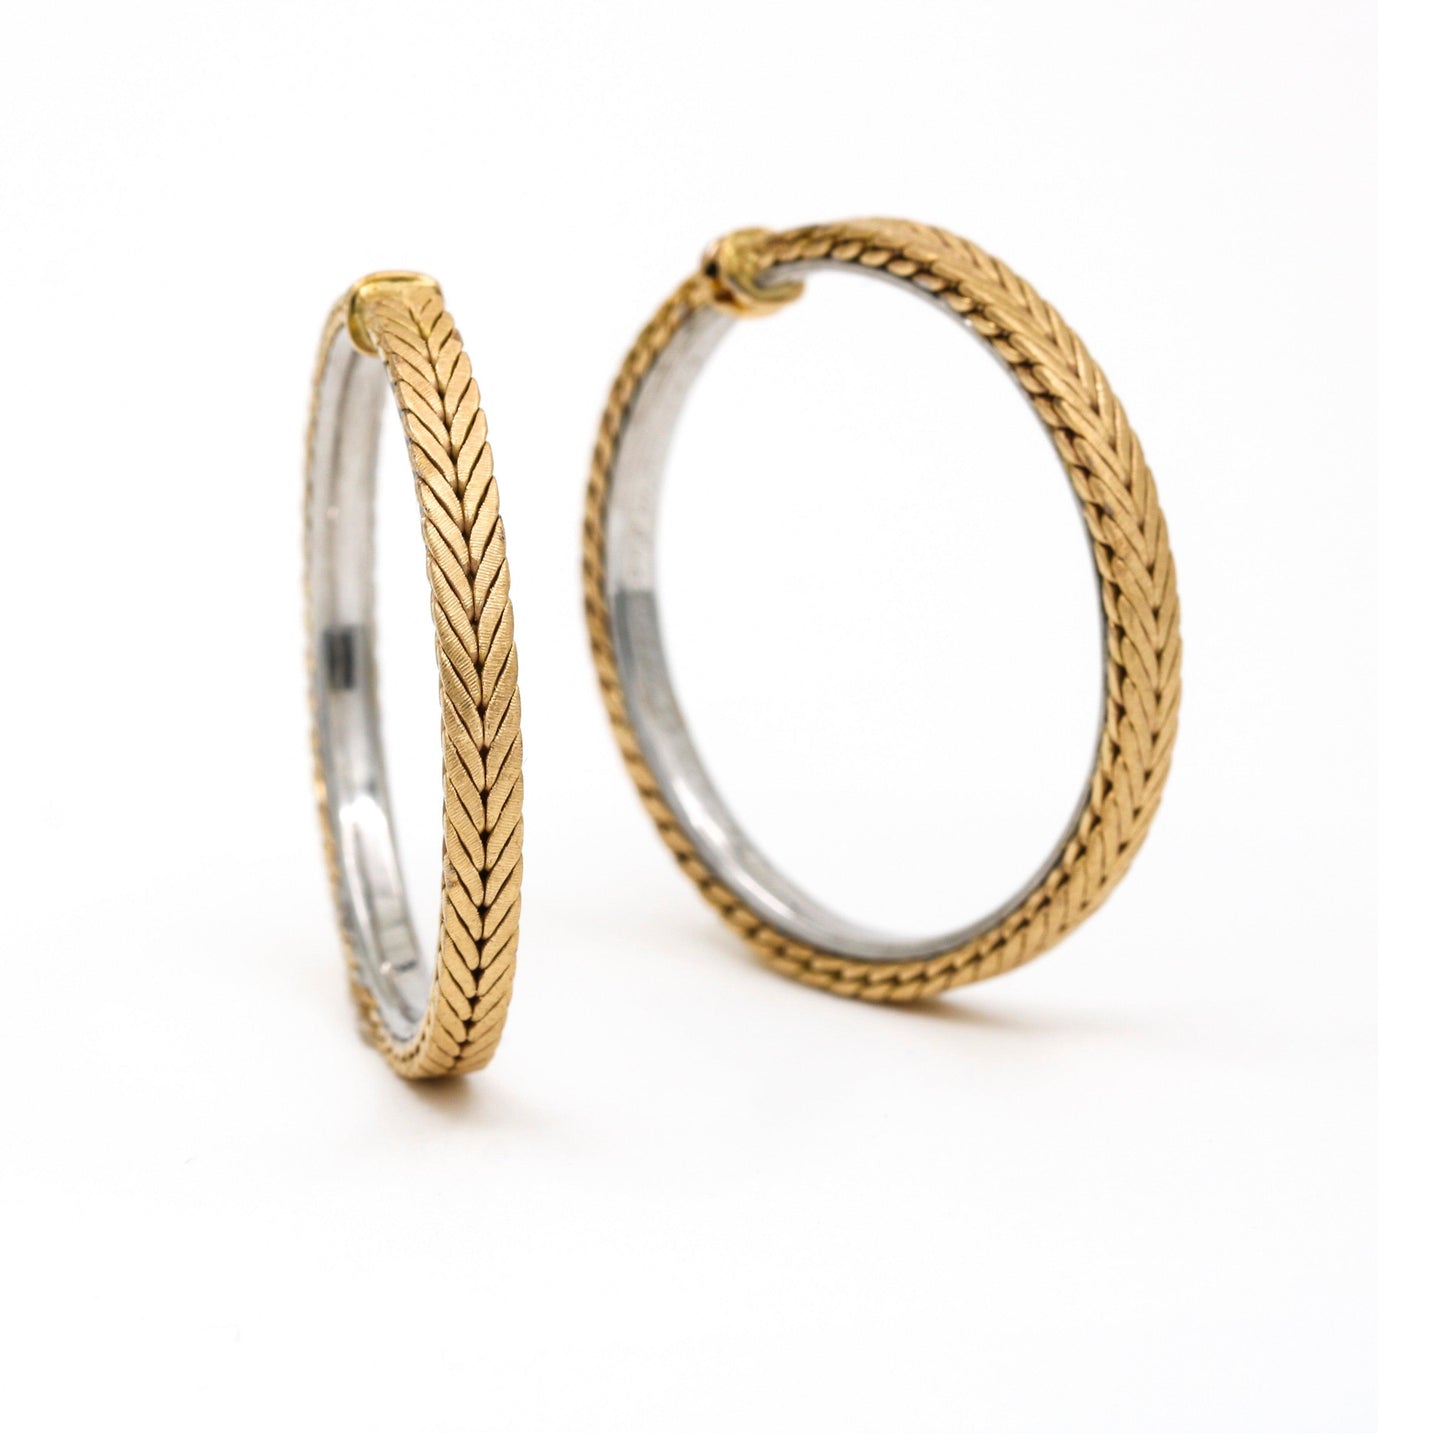 Buccellati Braided Round Hoop Earrings in 18k Rose White Gold Clip-On Hinged - 31 Jewels Inc.